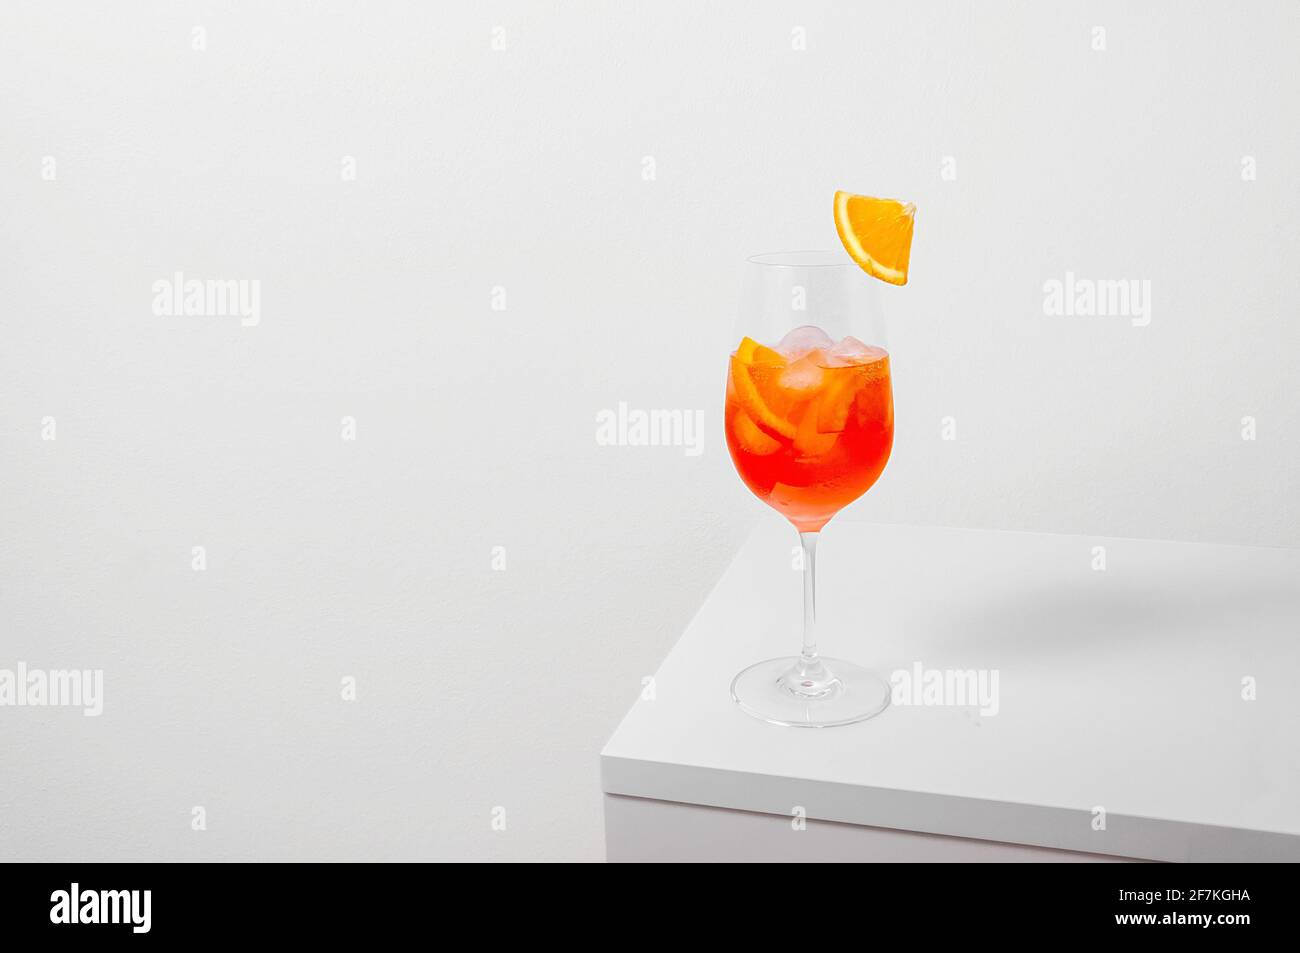 Aperol Spritz Cocktail in wine glass with ice and orange slice on white background. Long fizzy drink. Minimal creative concept. Stock Photo